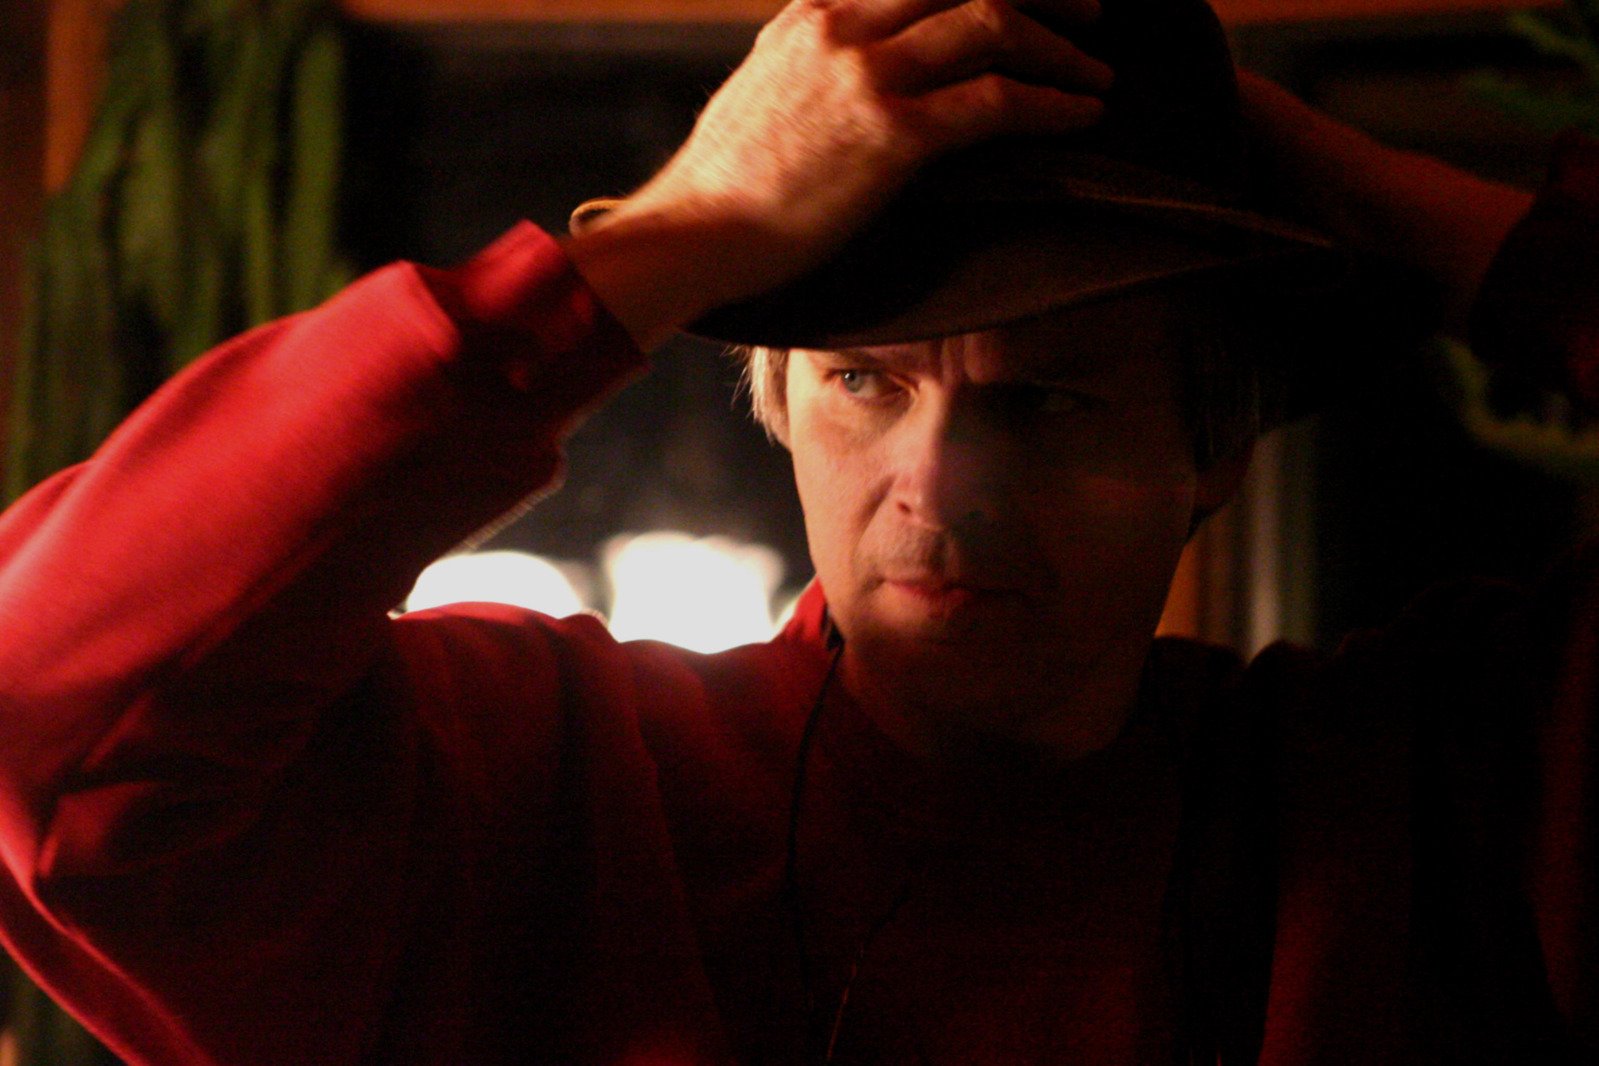 a man is covering his hat with a red jacket